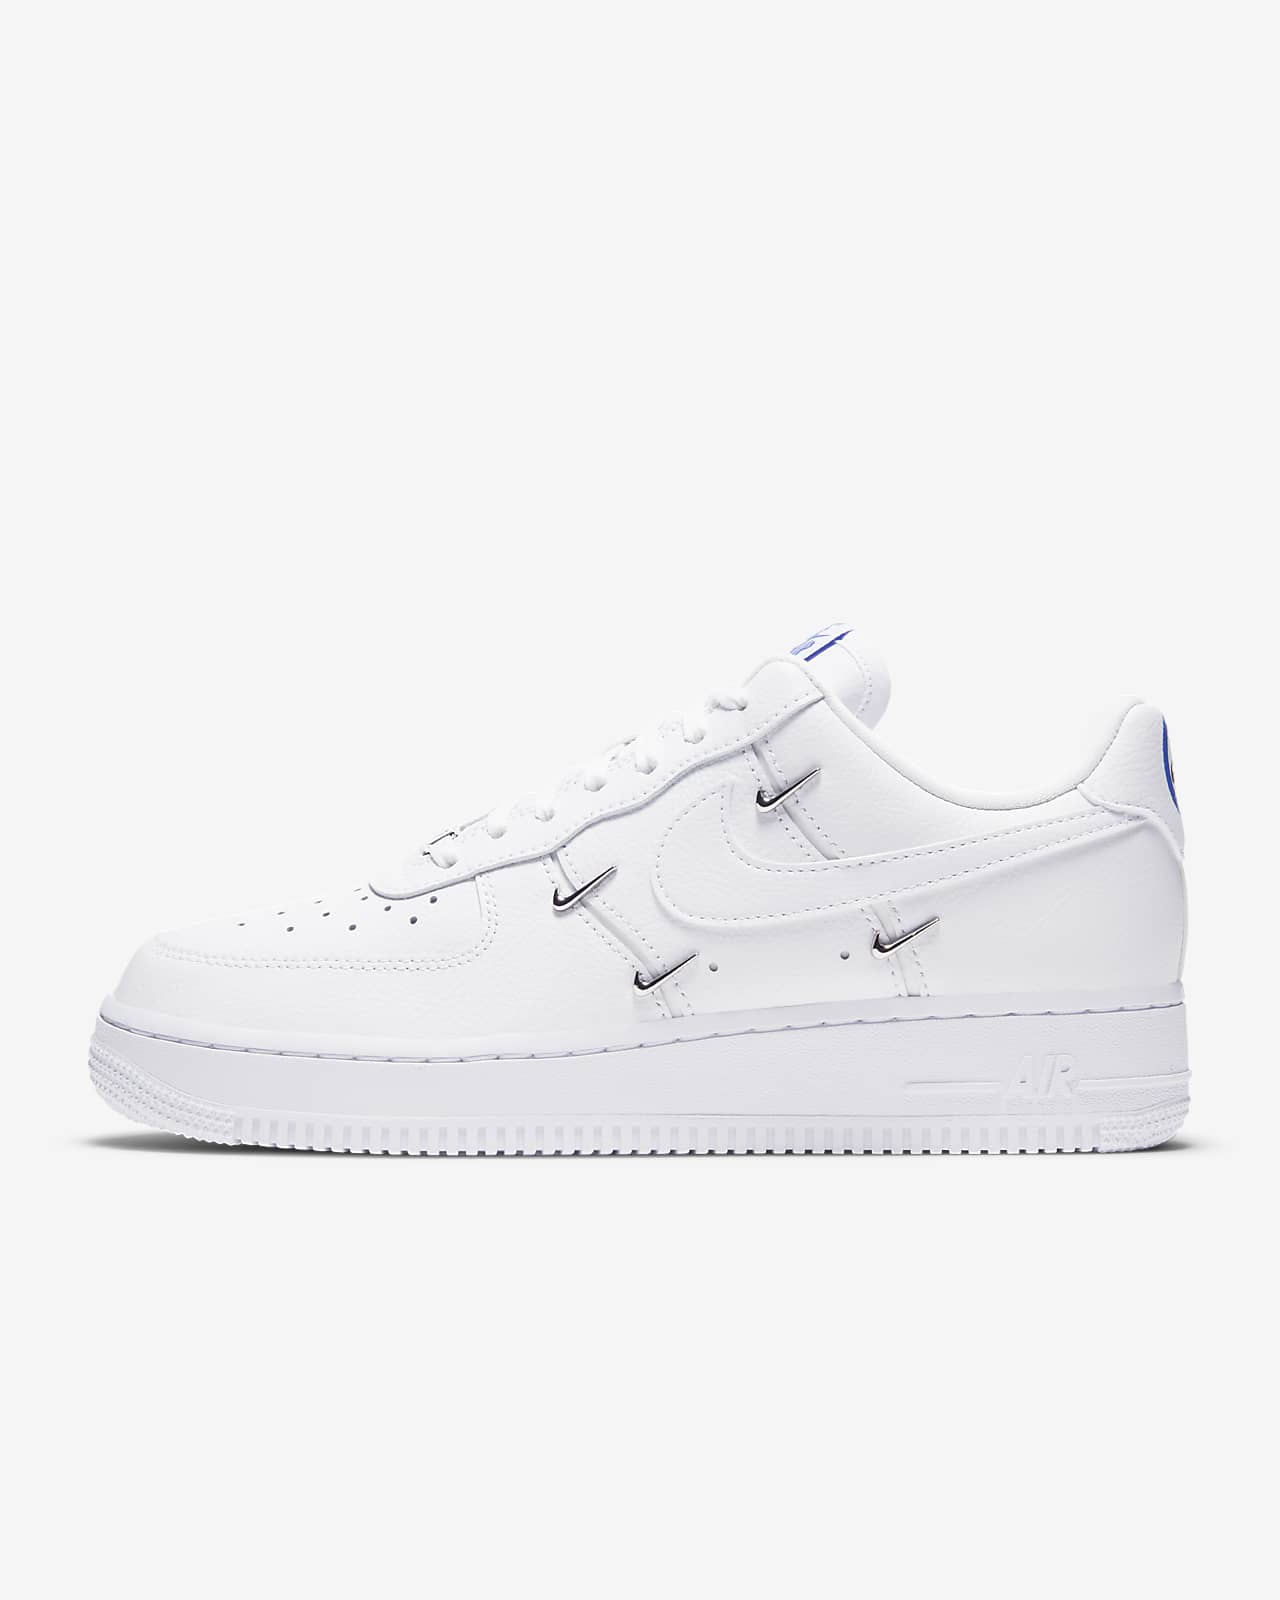 Christianity Abuse passionate Nike Air Force 1 '07 LX Women's Shoes. Nike.com